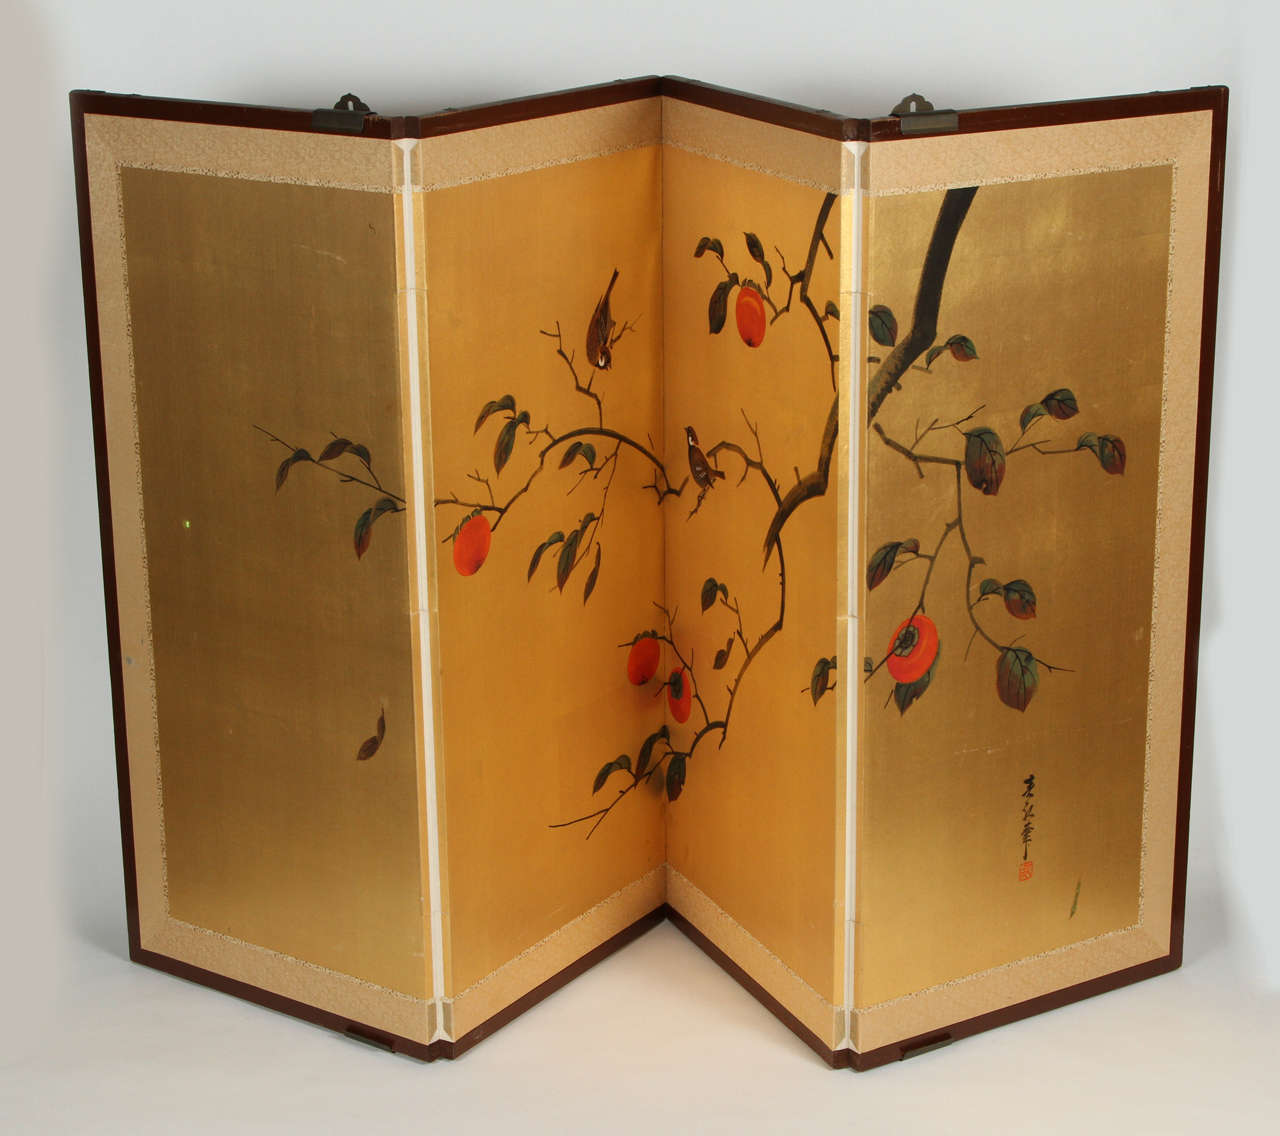 Vintage hand painted Japanese screen with birds and a persimmon tree. The image is painted on paper with ink and mineral color on a large field of gold leaf. There are four panels that fold to the size of one (16.5